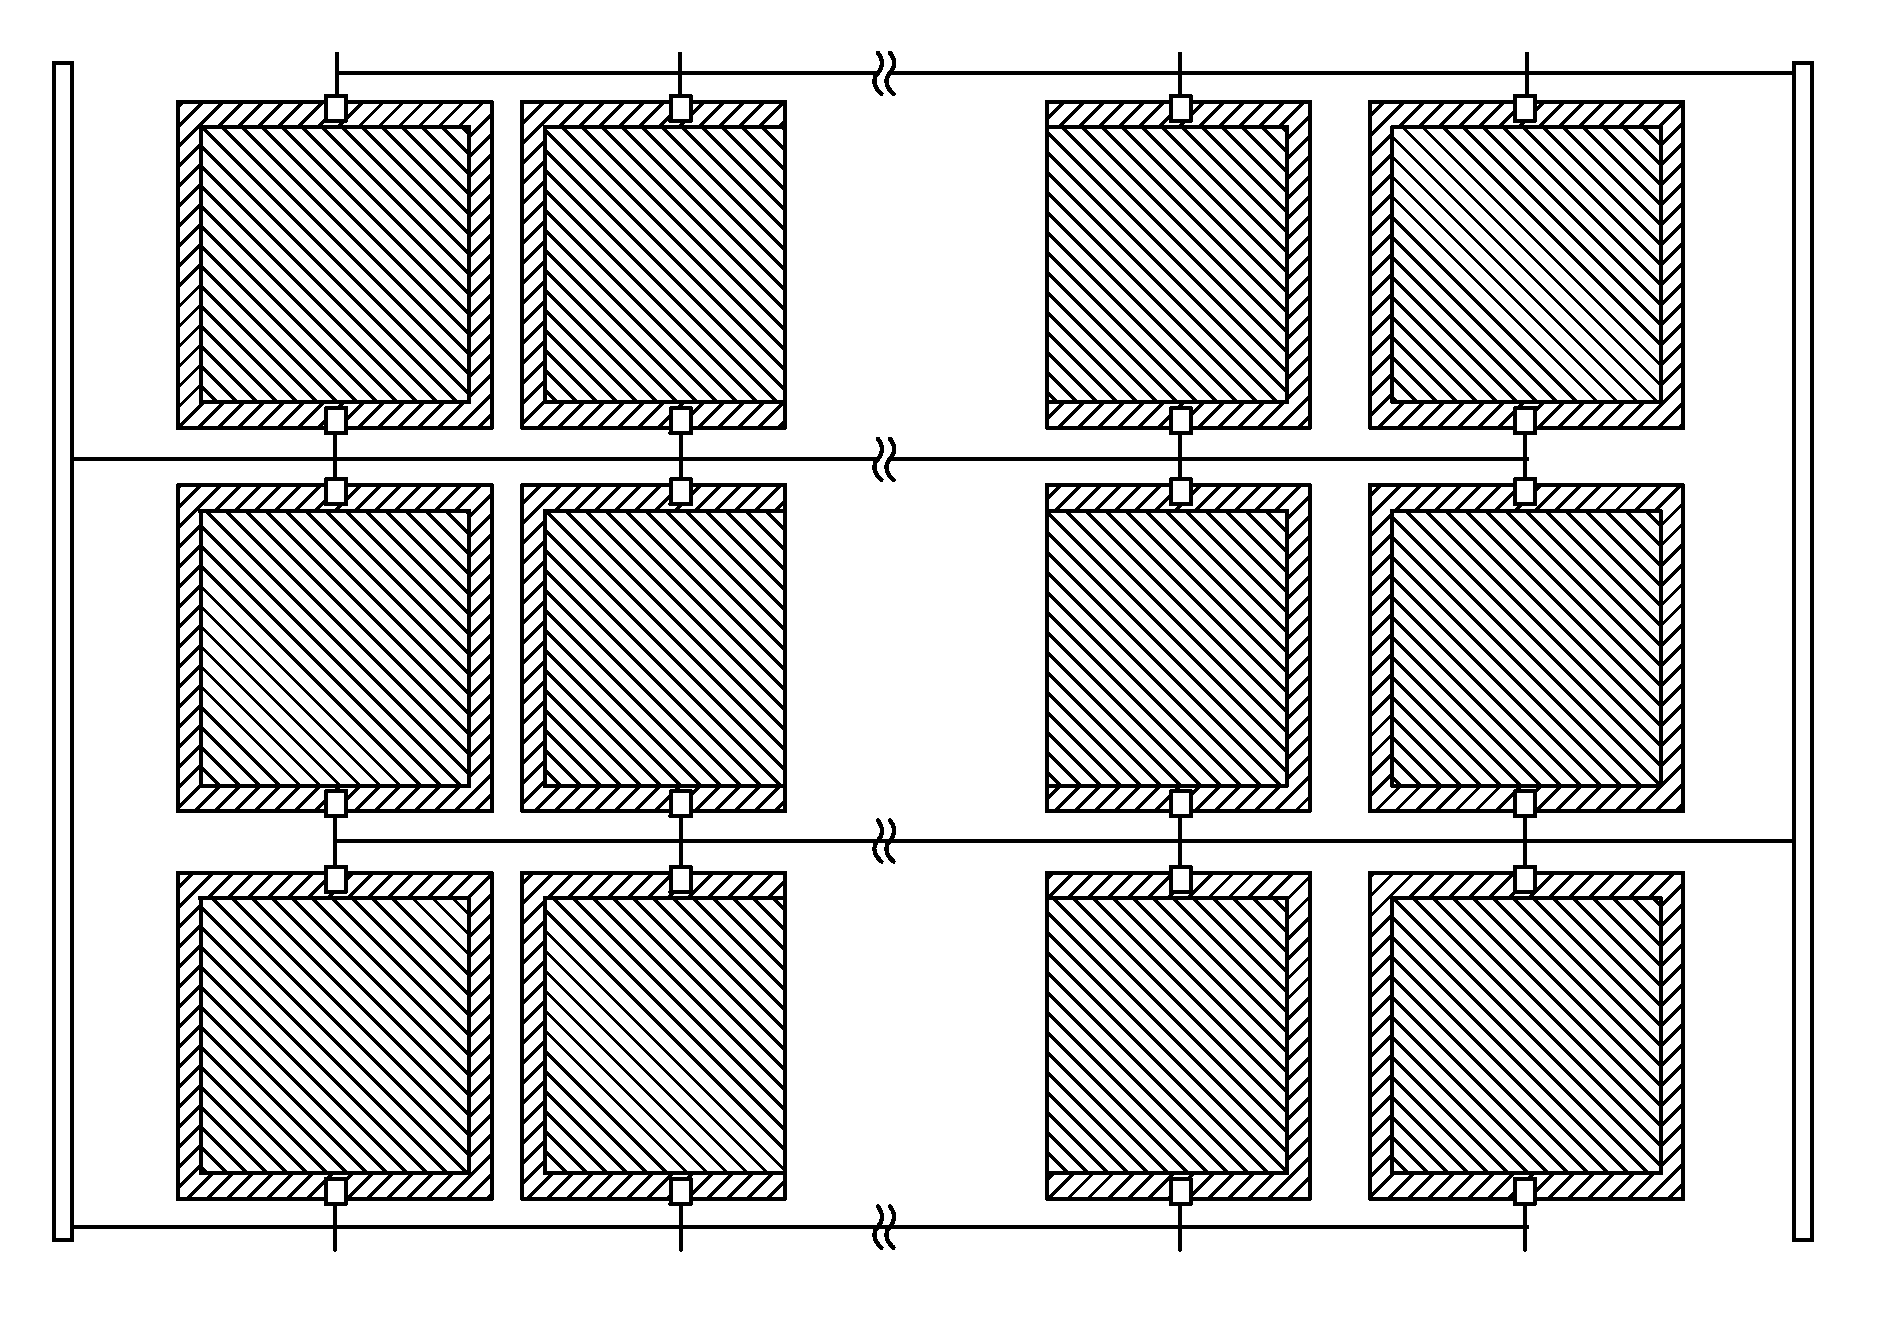 Multi pixel photo detector array of Geiger mode avalanche photodiodes